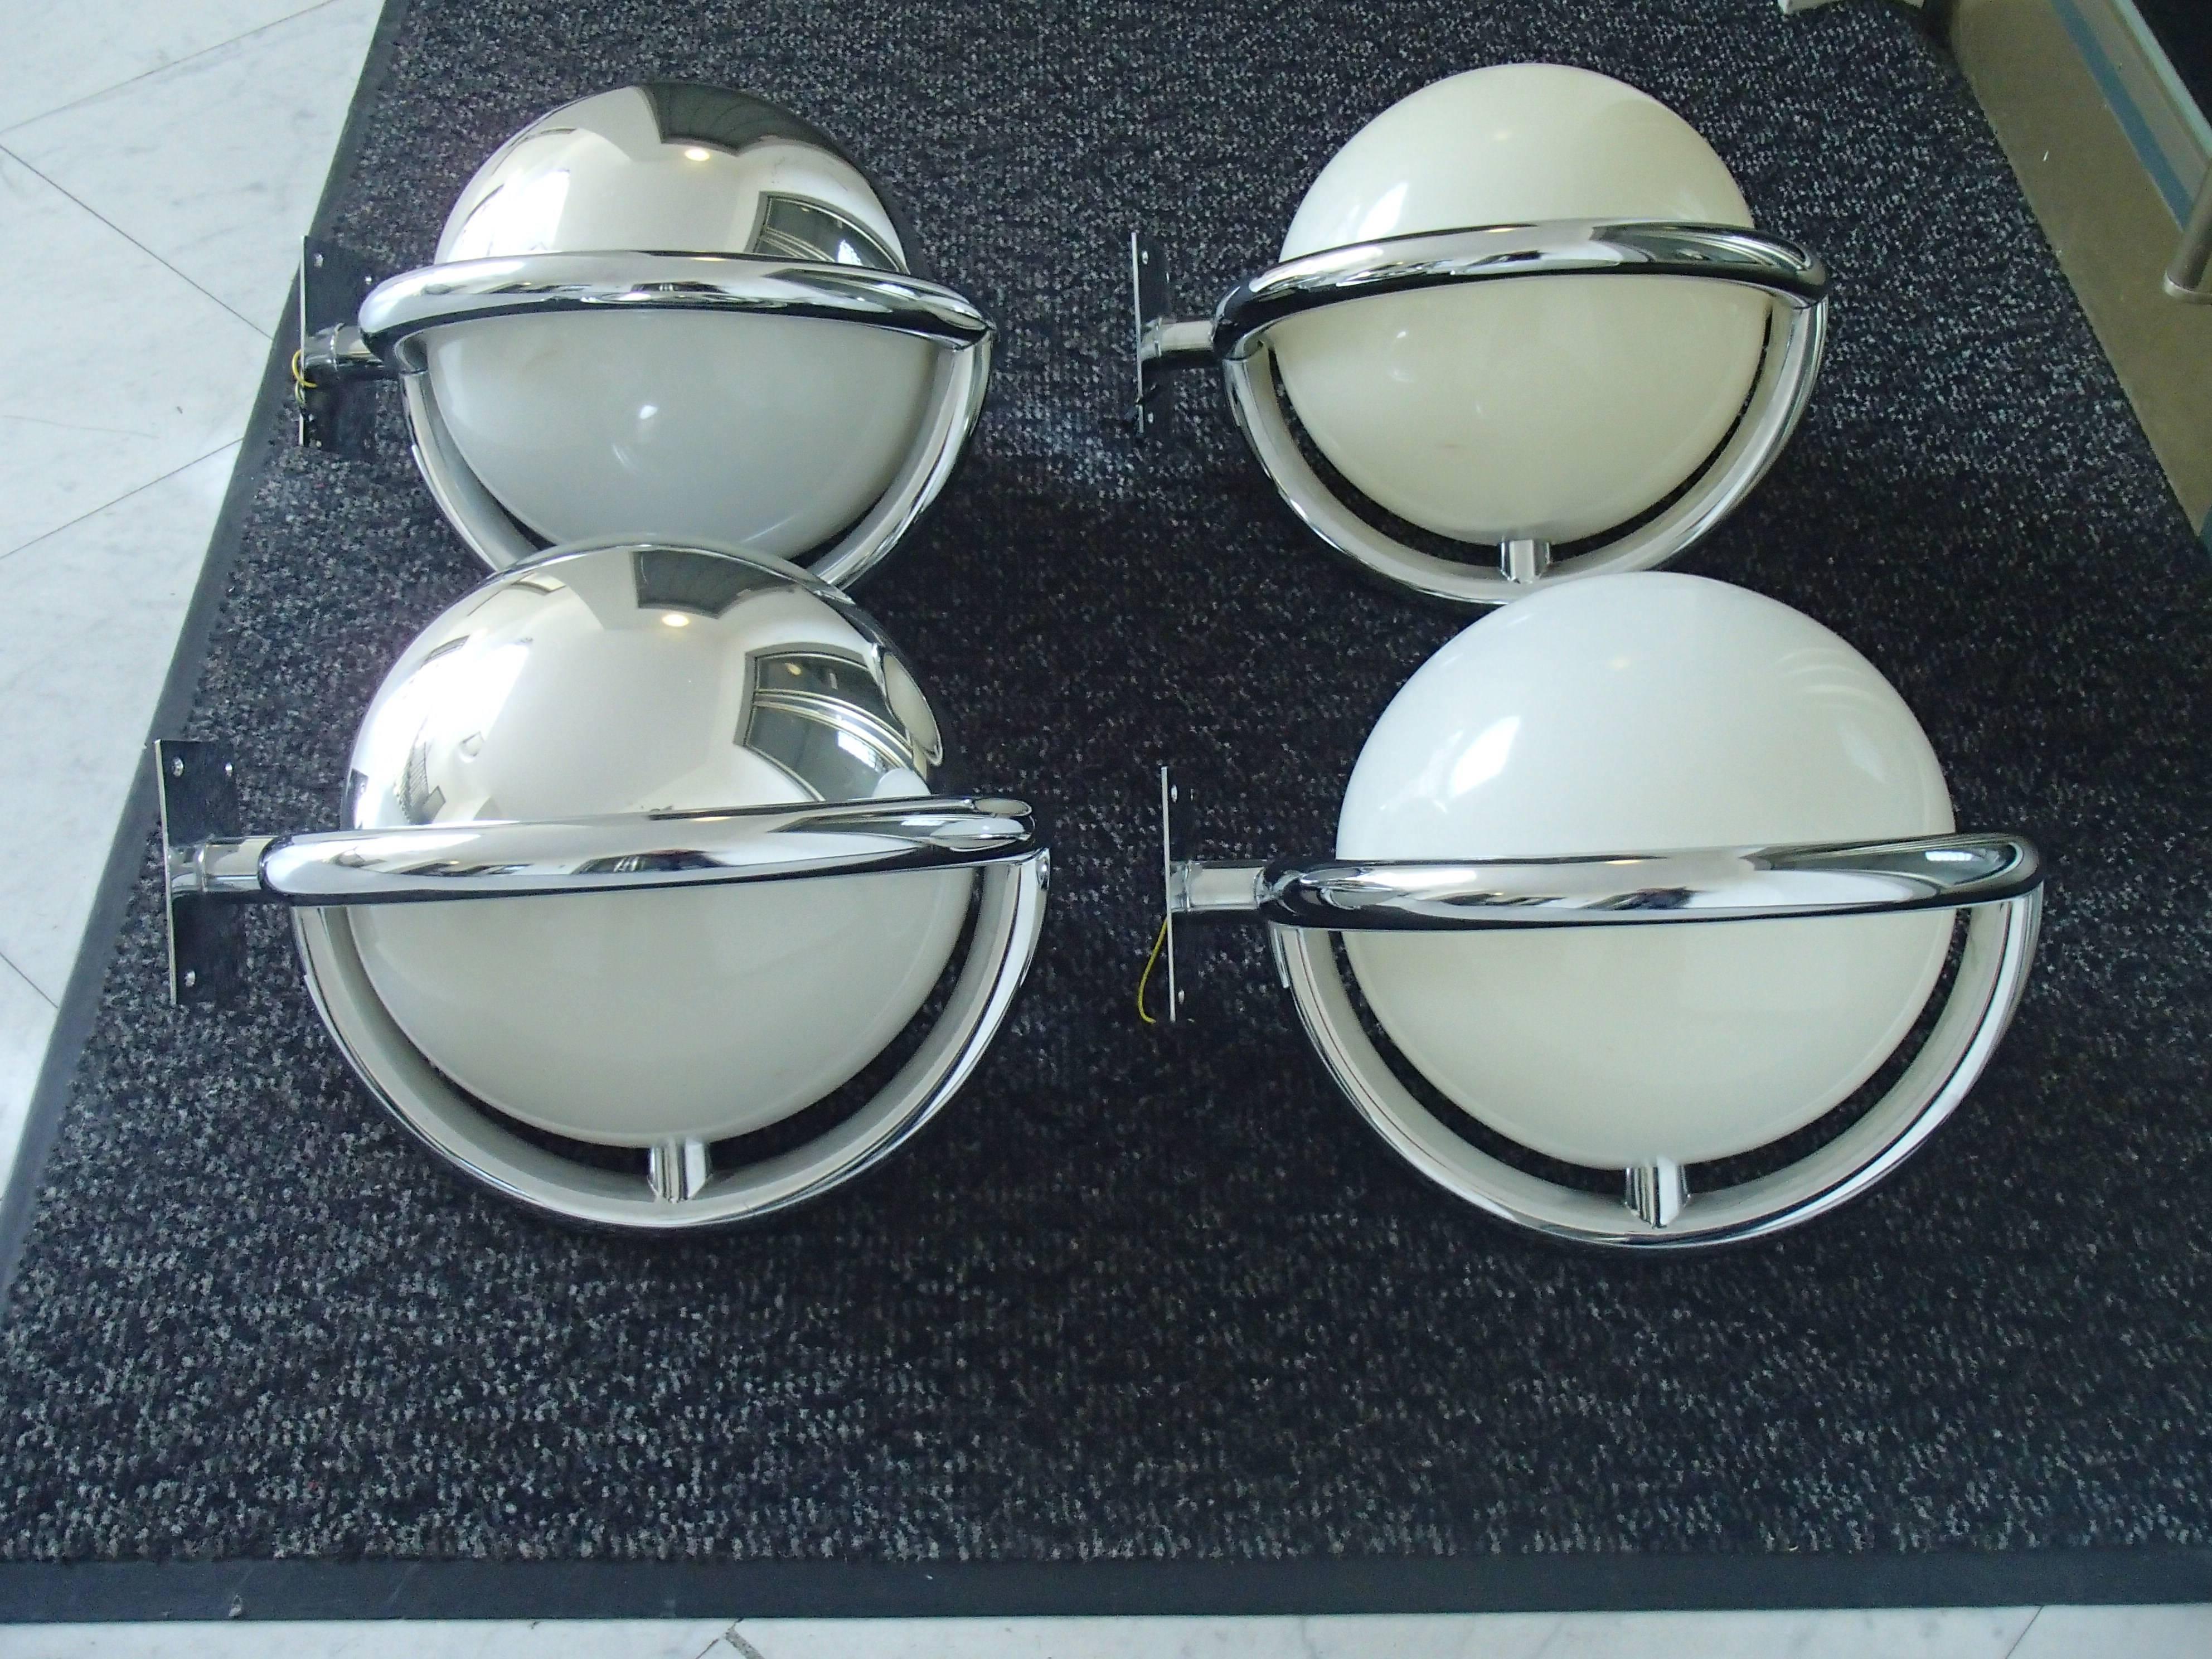 Pair of Art Deco Bauhaus chrome and plexiglass huge round wall lights scones
there are more available.